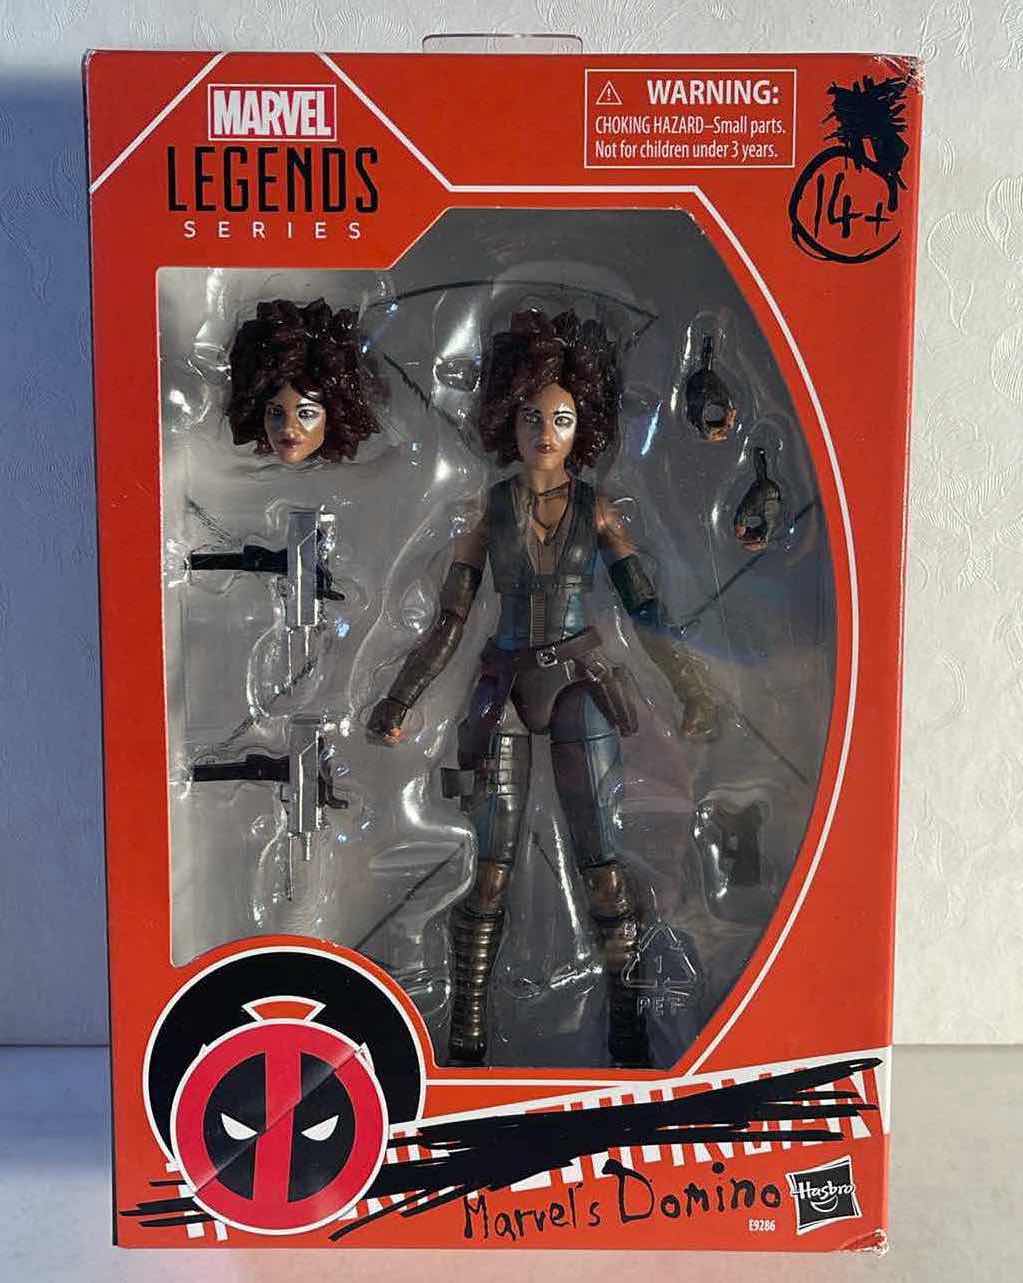 Photo 1 of NIB MARVEL LEGENDS SERIES “MARVELS DOMINO” ACTION FIGURE w/ ACCESSOIRES- RETAIL PRICE $24.99